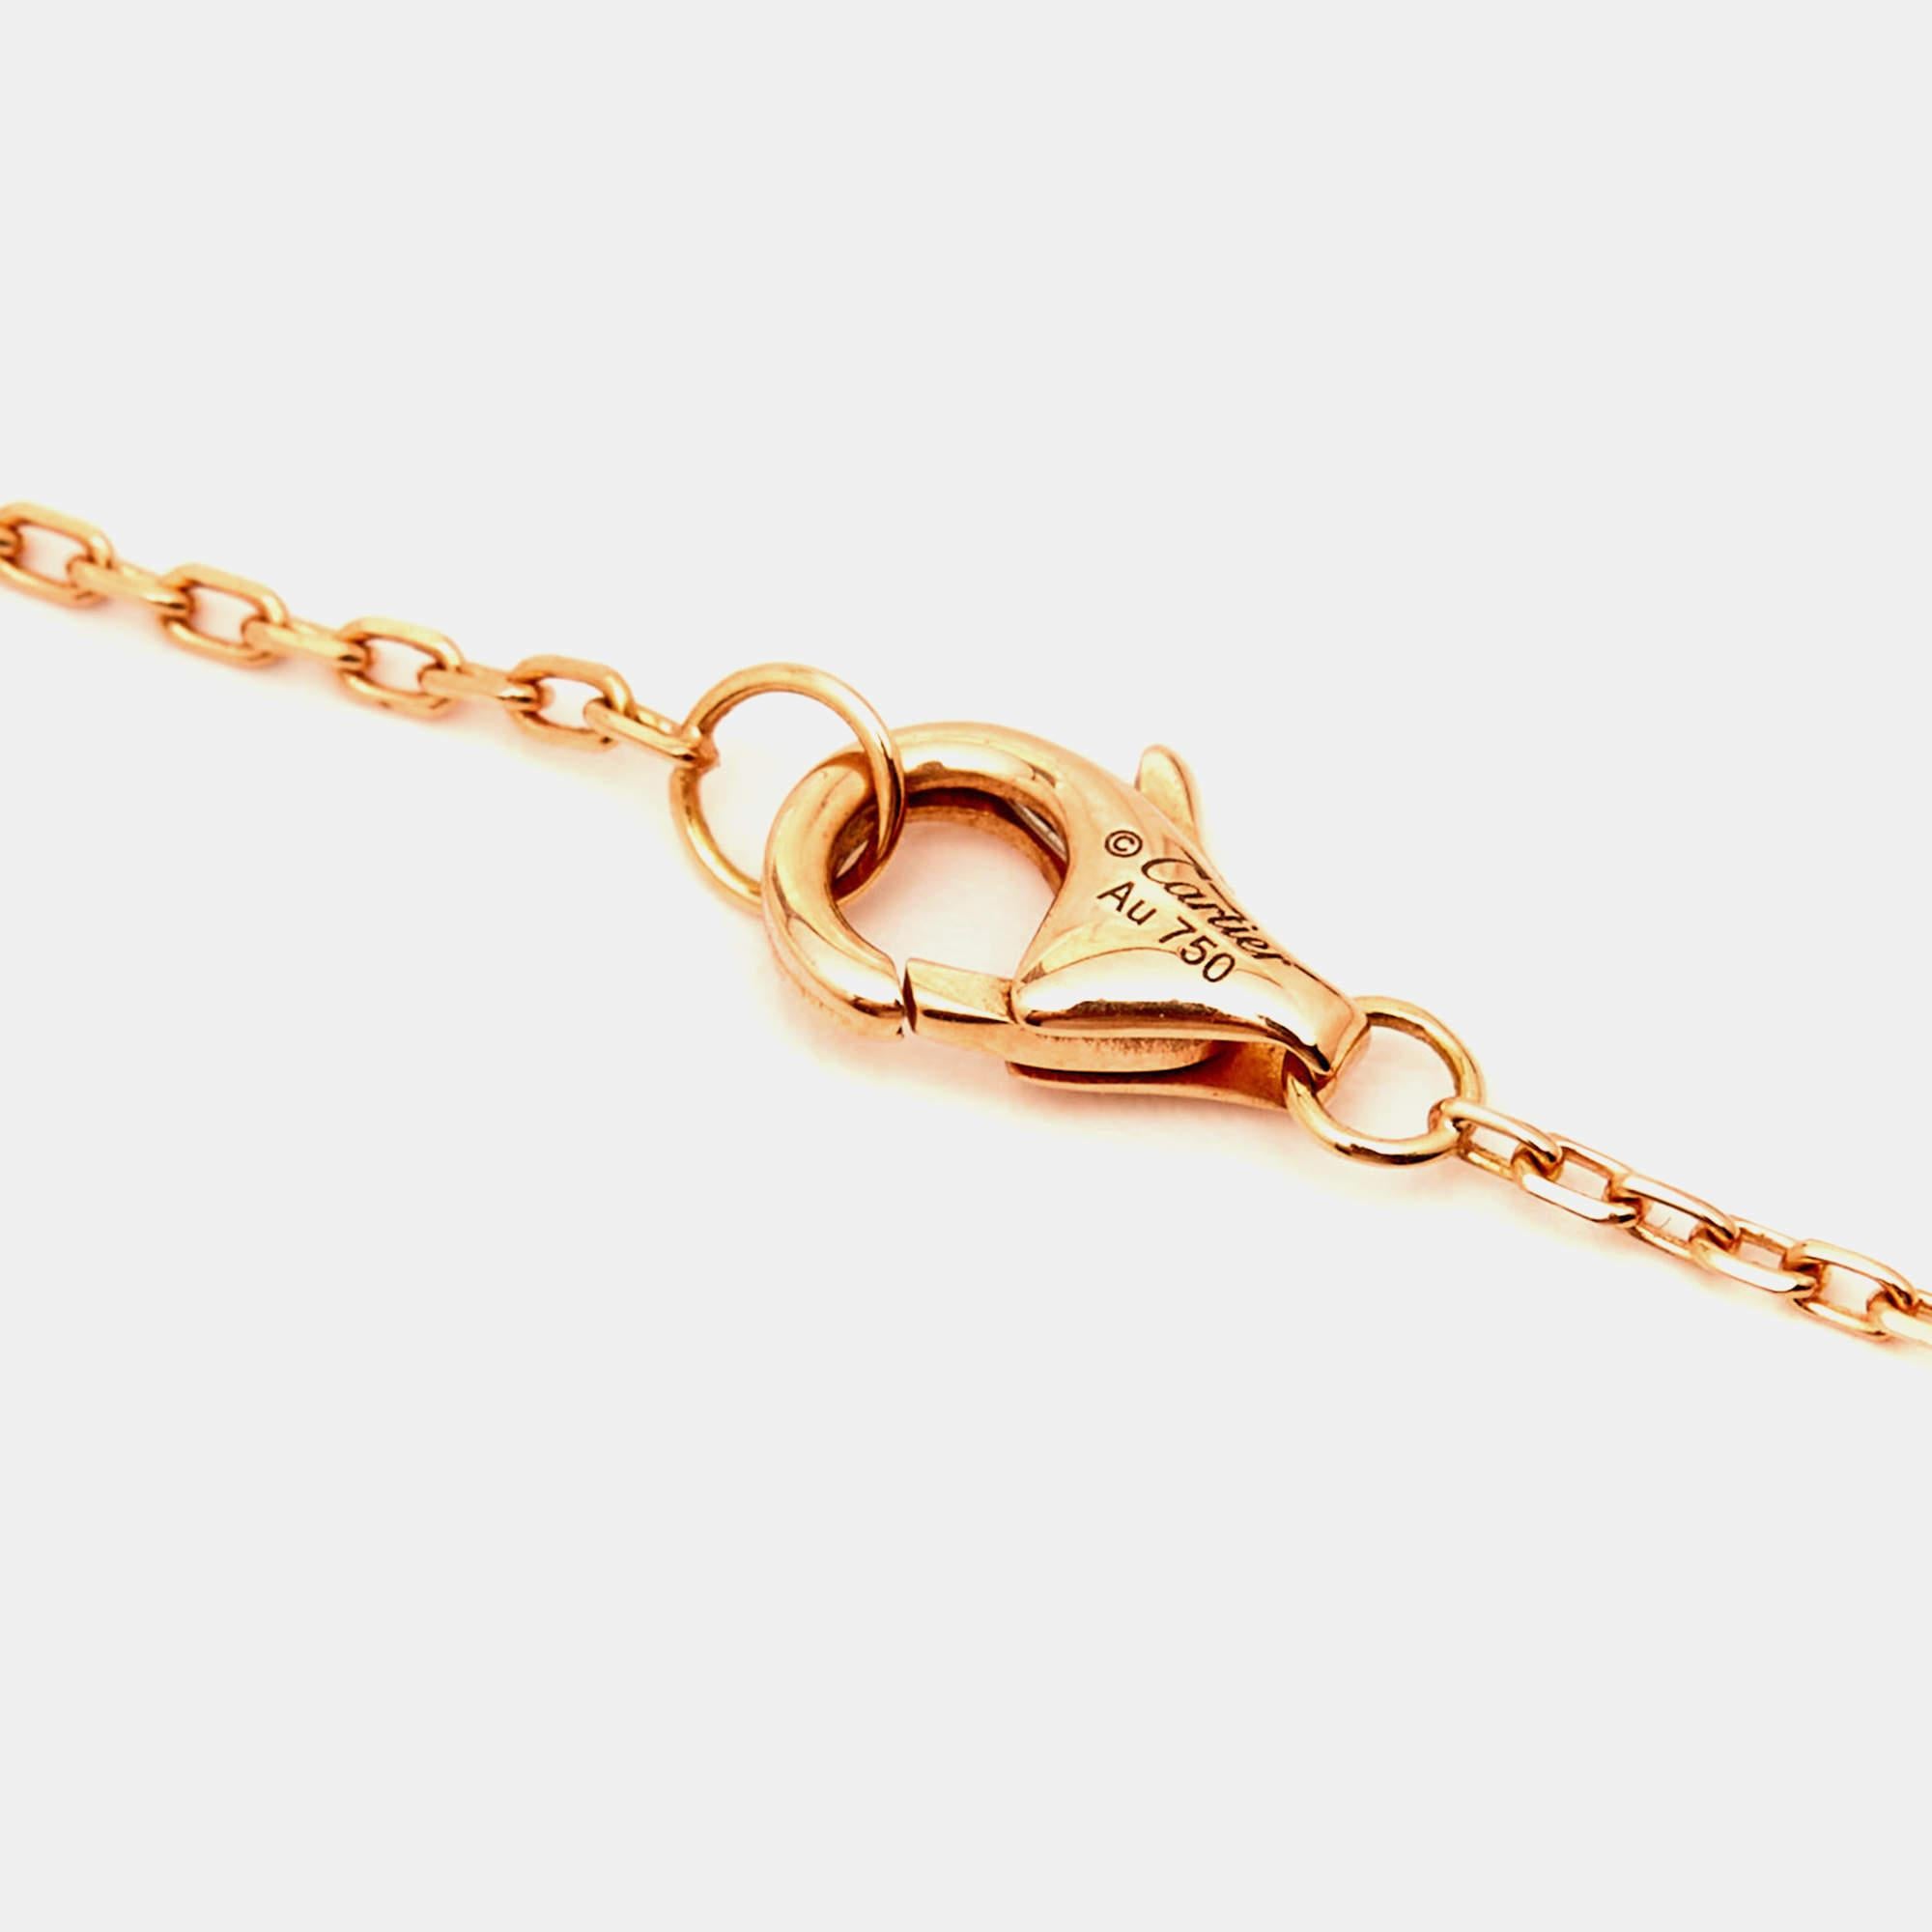 The Cartier necklace is a luxurious piece of jewelry featuring three intertwined rings made of 18k white, yellow, and rose gold. This iconic design symbolizes love, fidelity, and friendship, creating an elegant and timeless